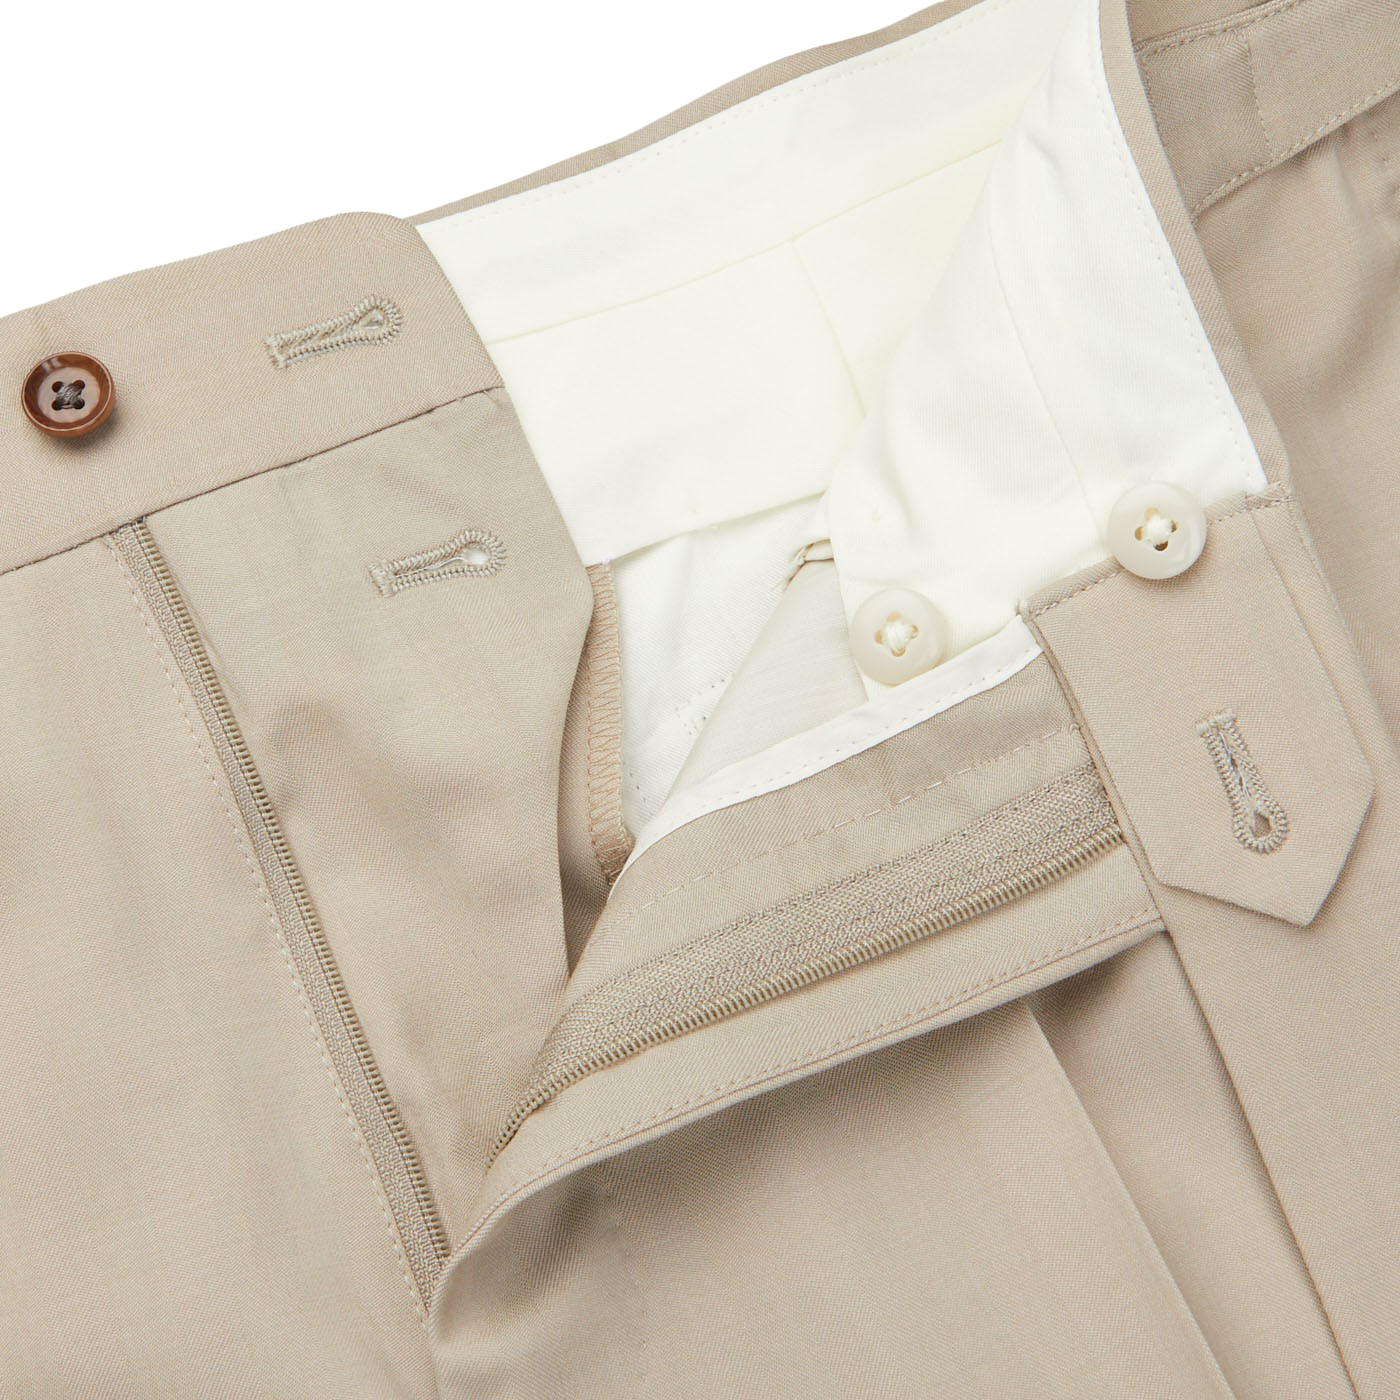 A pair of Light Beige Herringbone Wool Suit trousers by Ring Jacket with a button on the pocket.